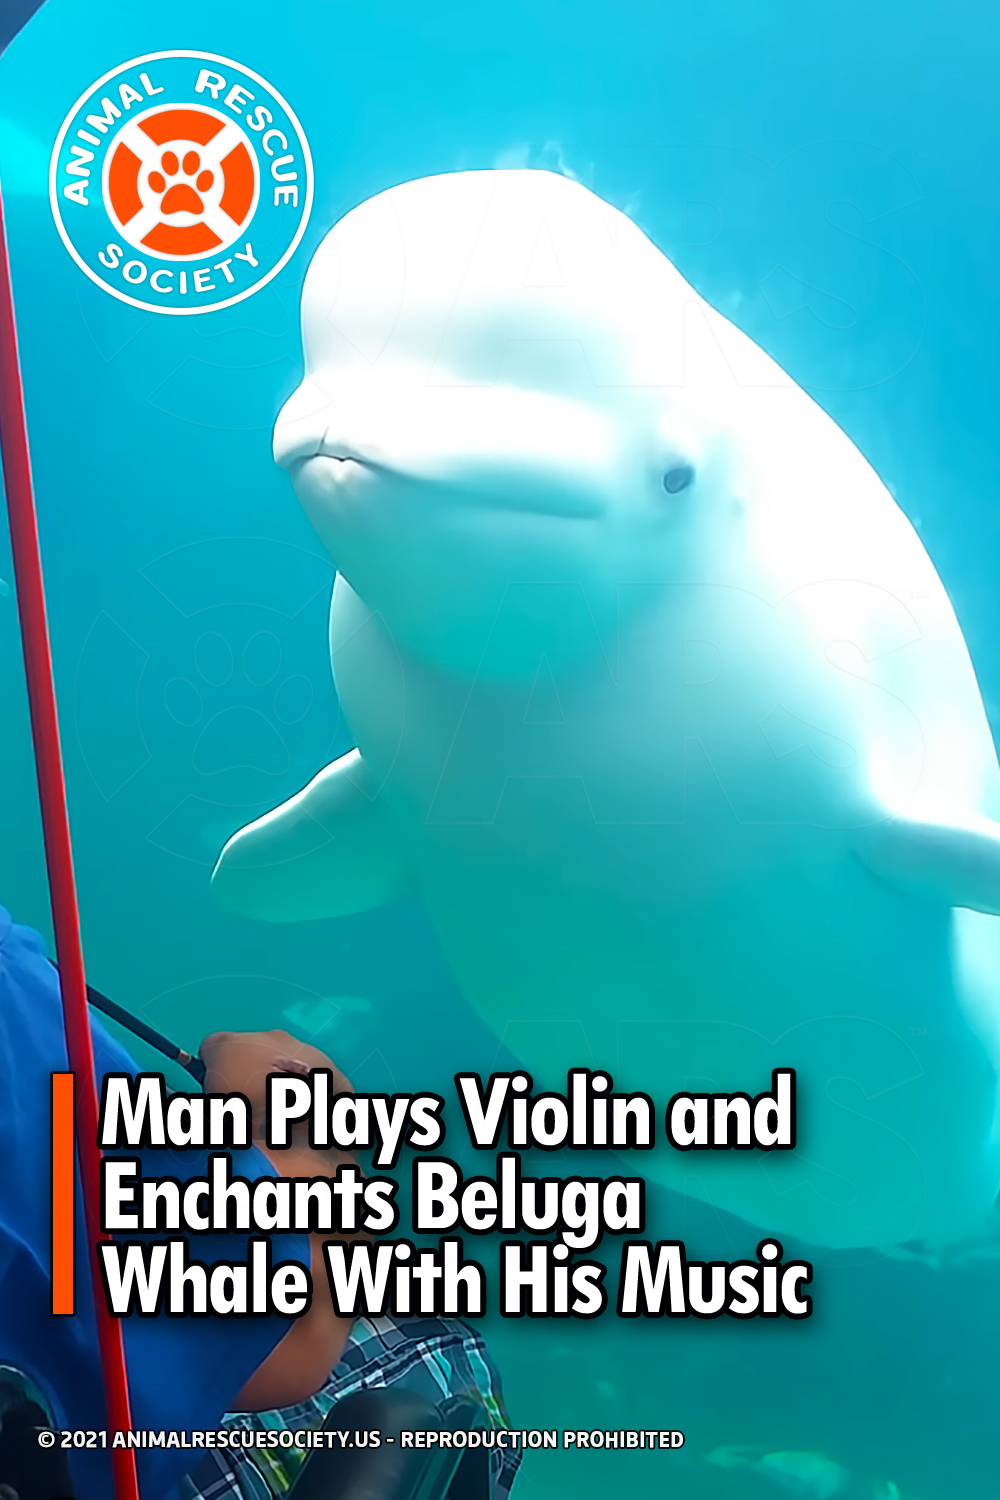 Man Plays Violin and Enchants Beluga Whale With His Music